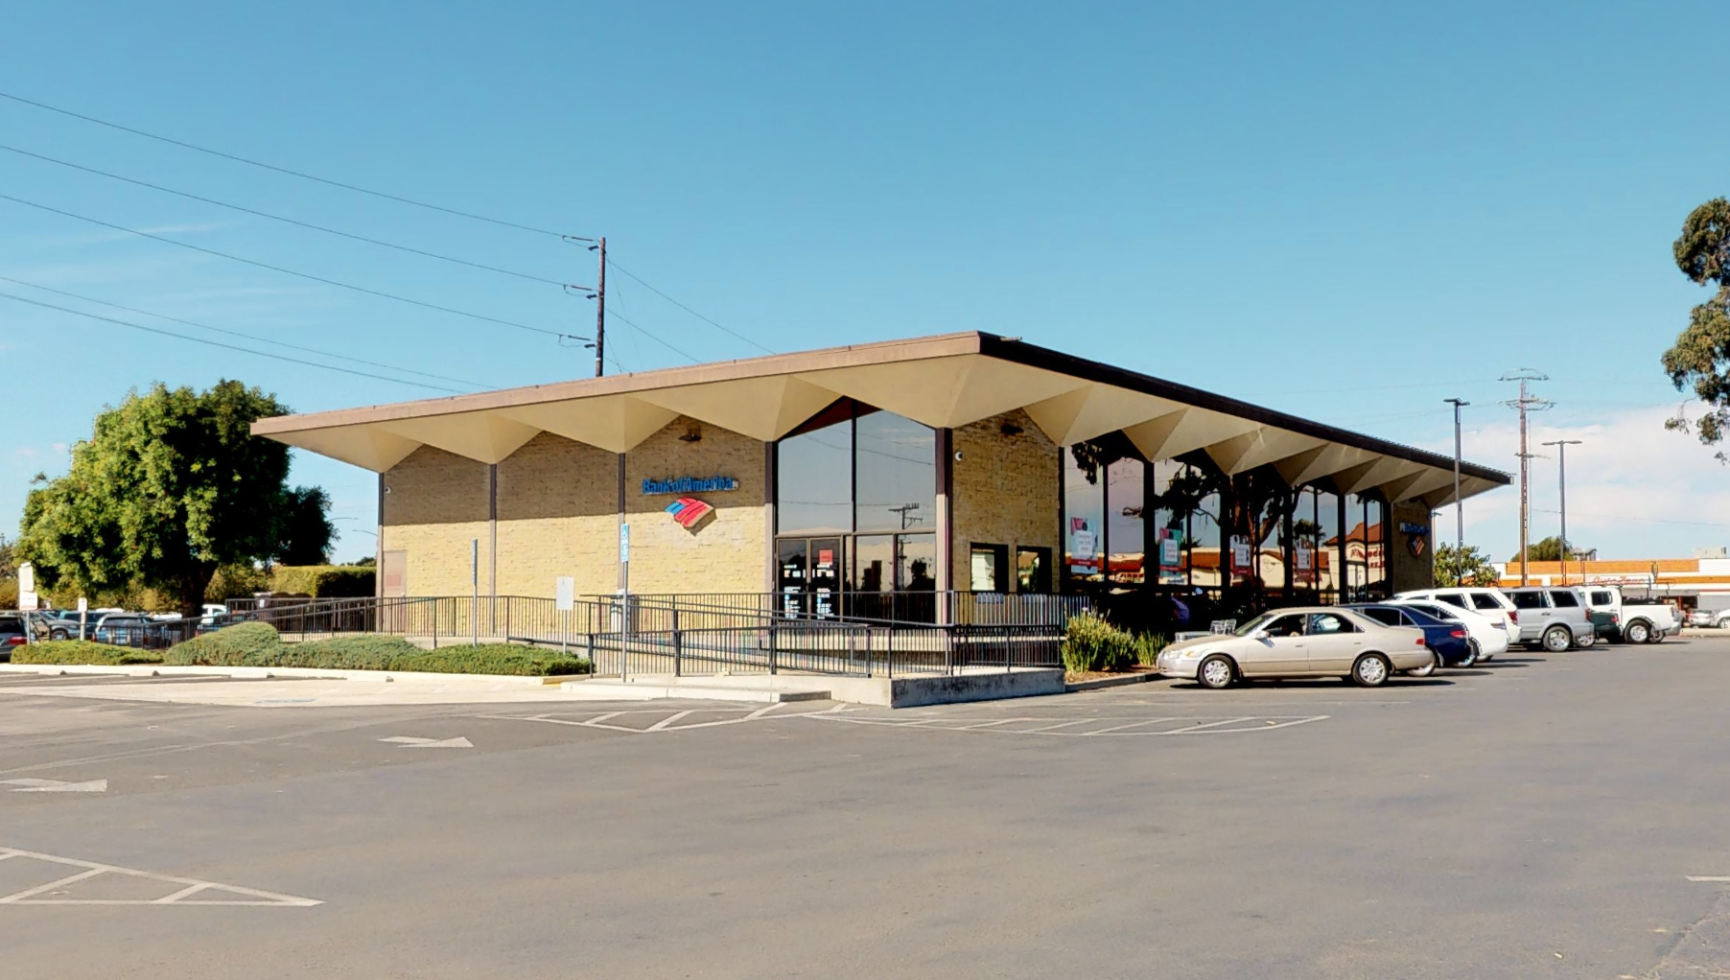 Bank of America financial center with walk-up ATM | 1010 E Alisal St, Salinas, CA 93905